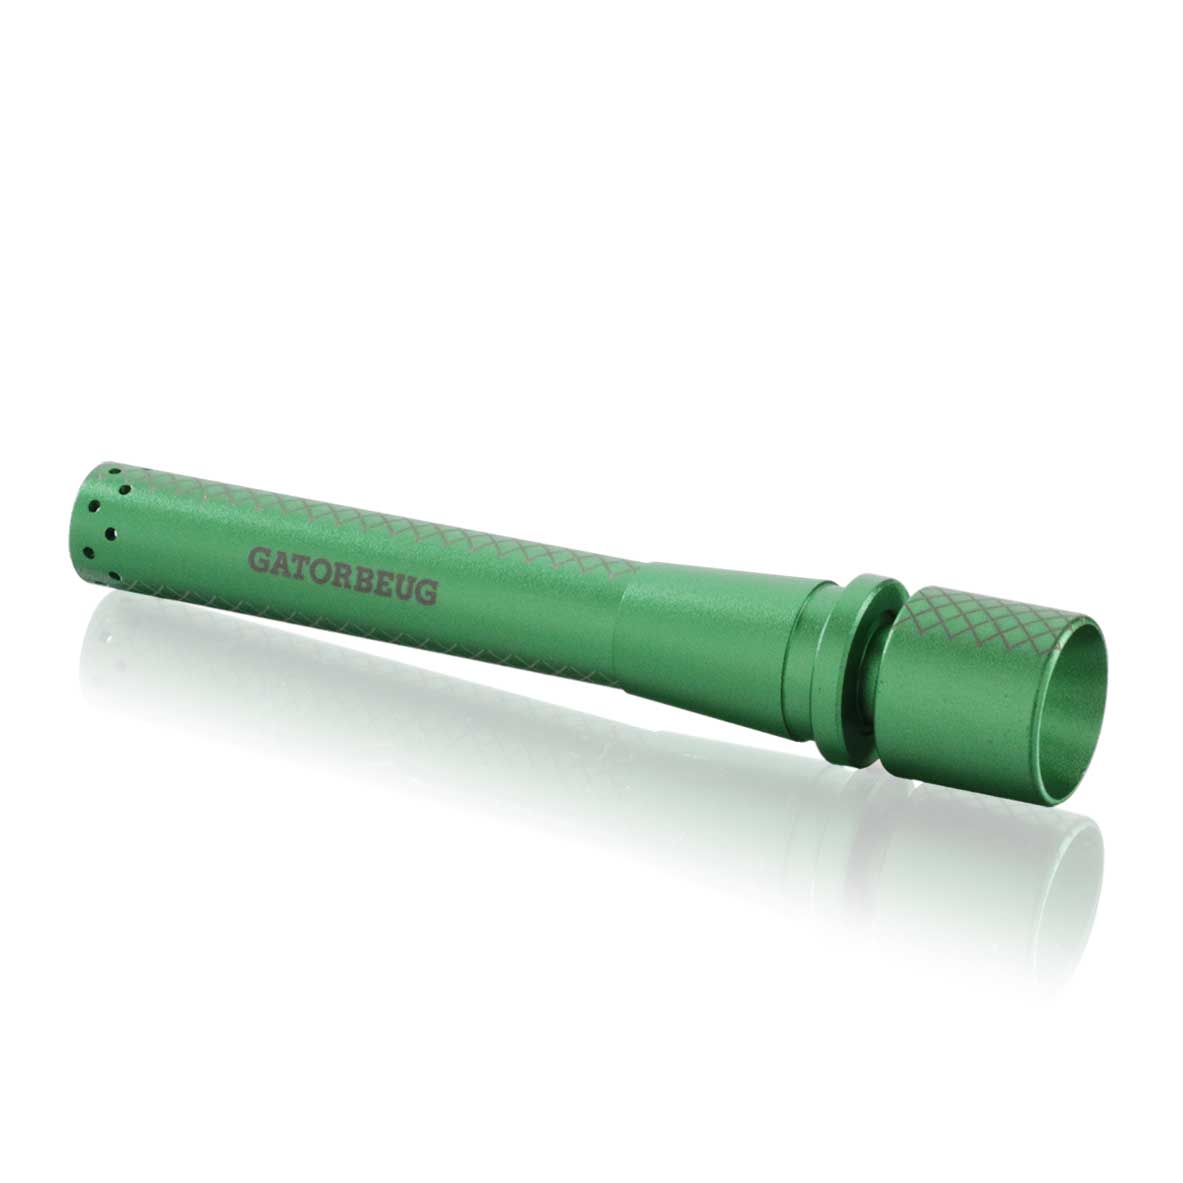 UNBREAKABLE STEM AND BOWL KIT GREEN